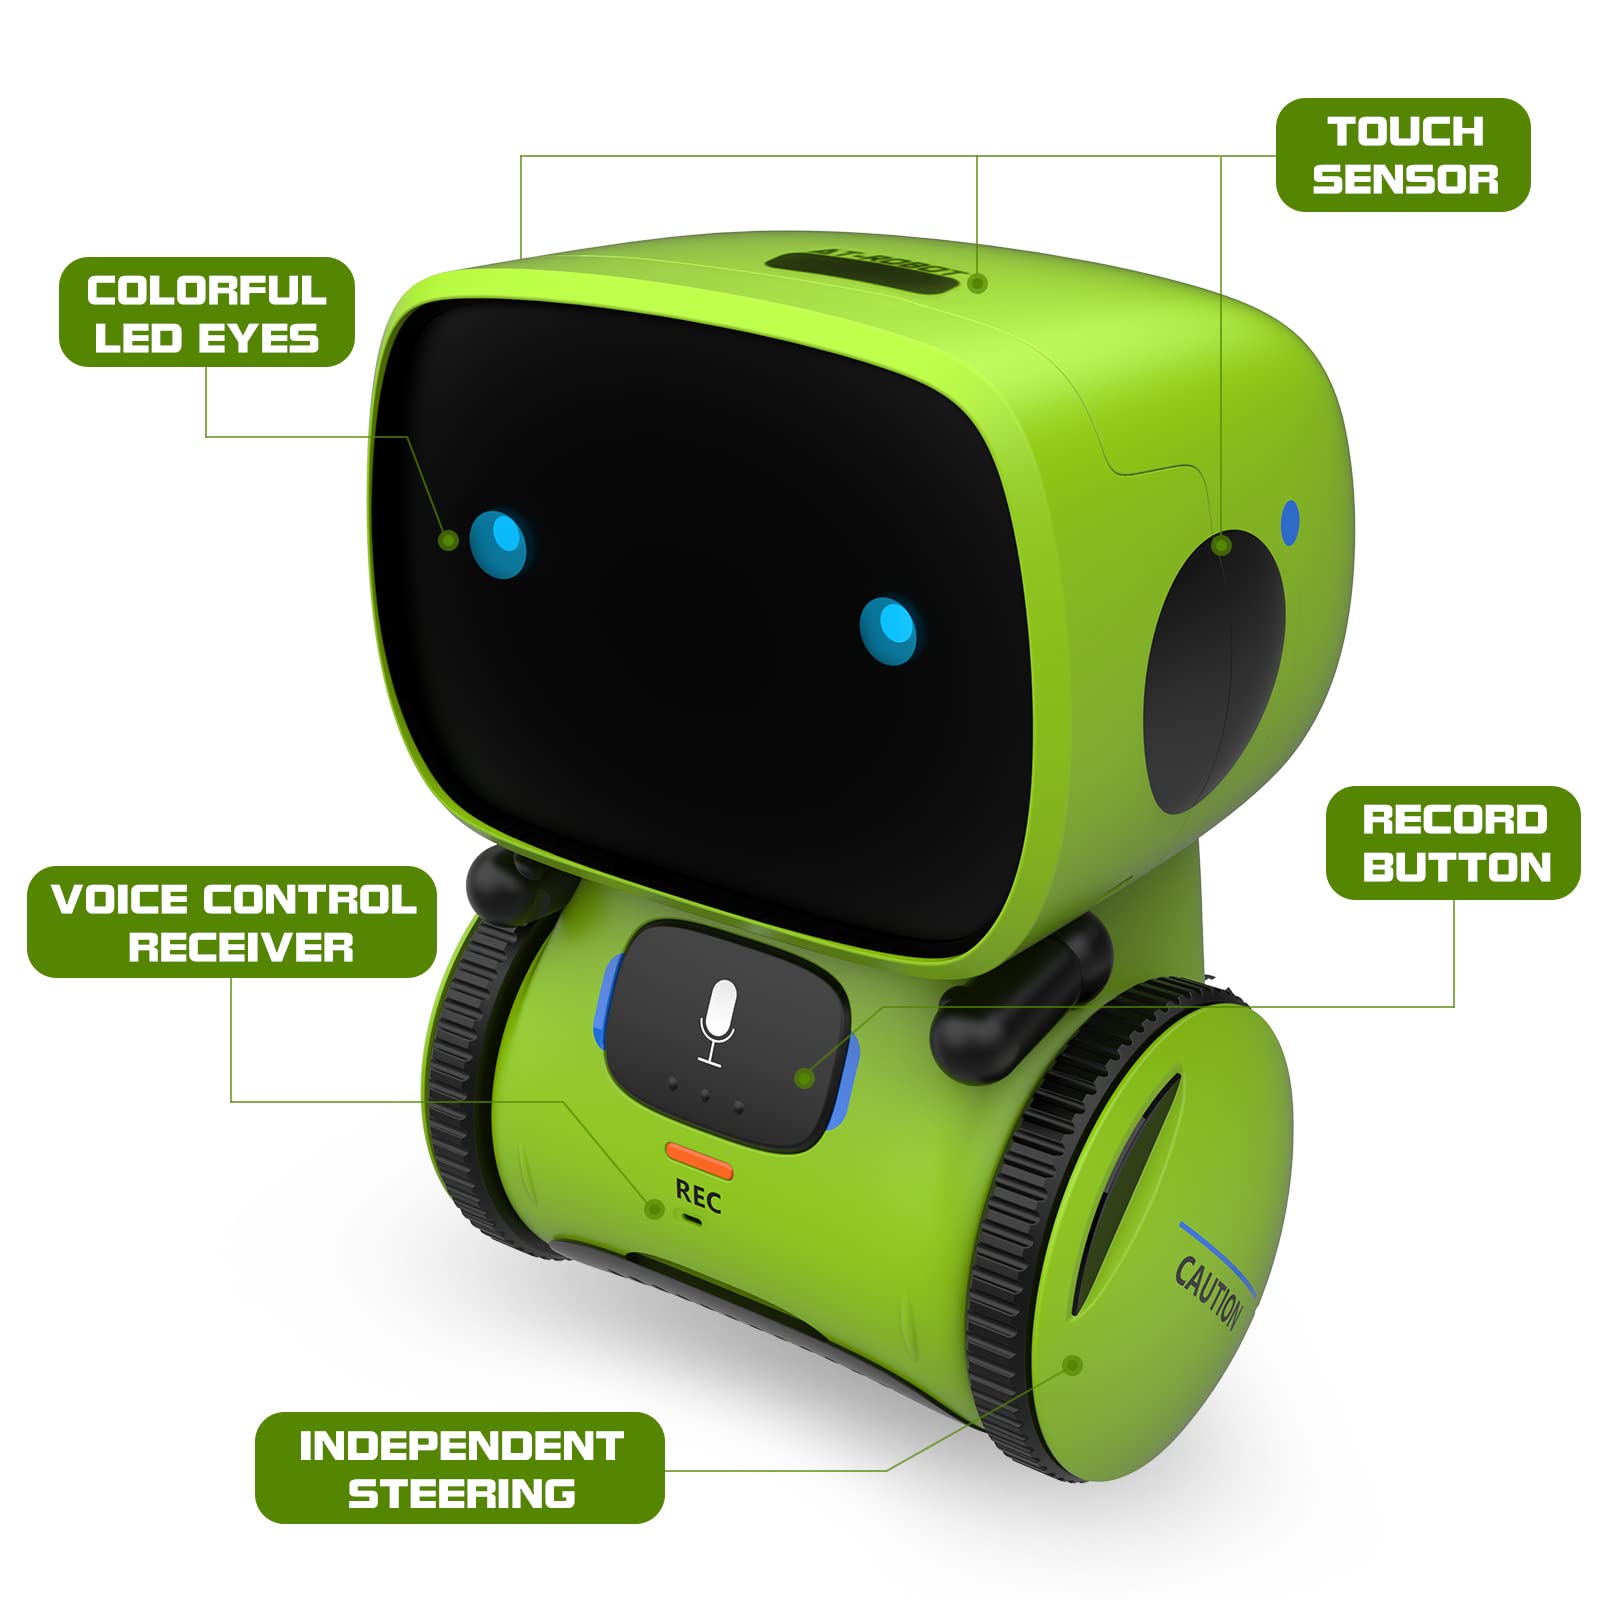 GILOBABY Kids Robot Toys, Interactive Robot Companion Smart Talking Robot with Voice Control Touch Sensor, Dancing, Singing, Recording, Repeat, Birthday Gifts for Boys Ages 3+ Years (Green)